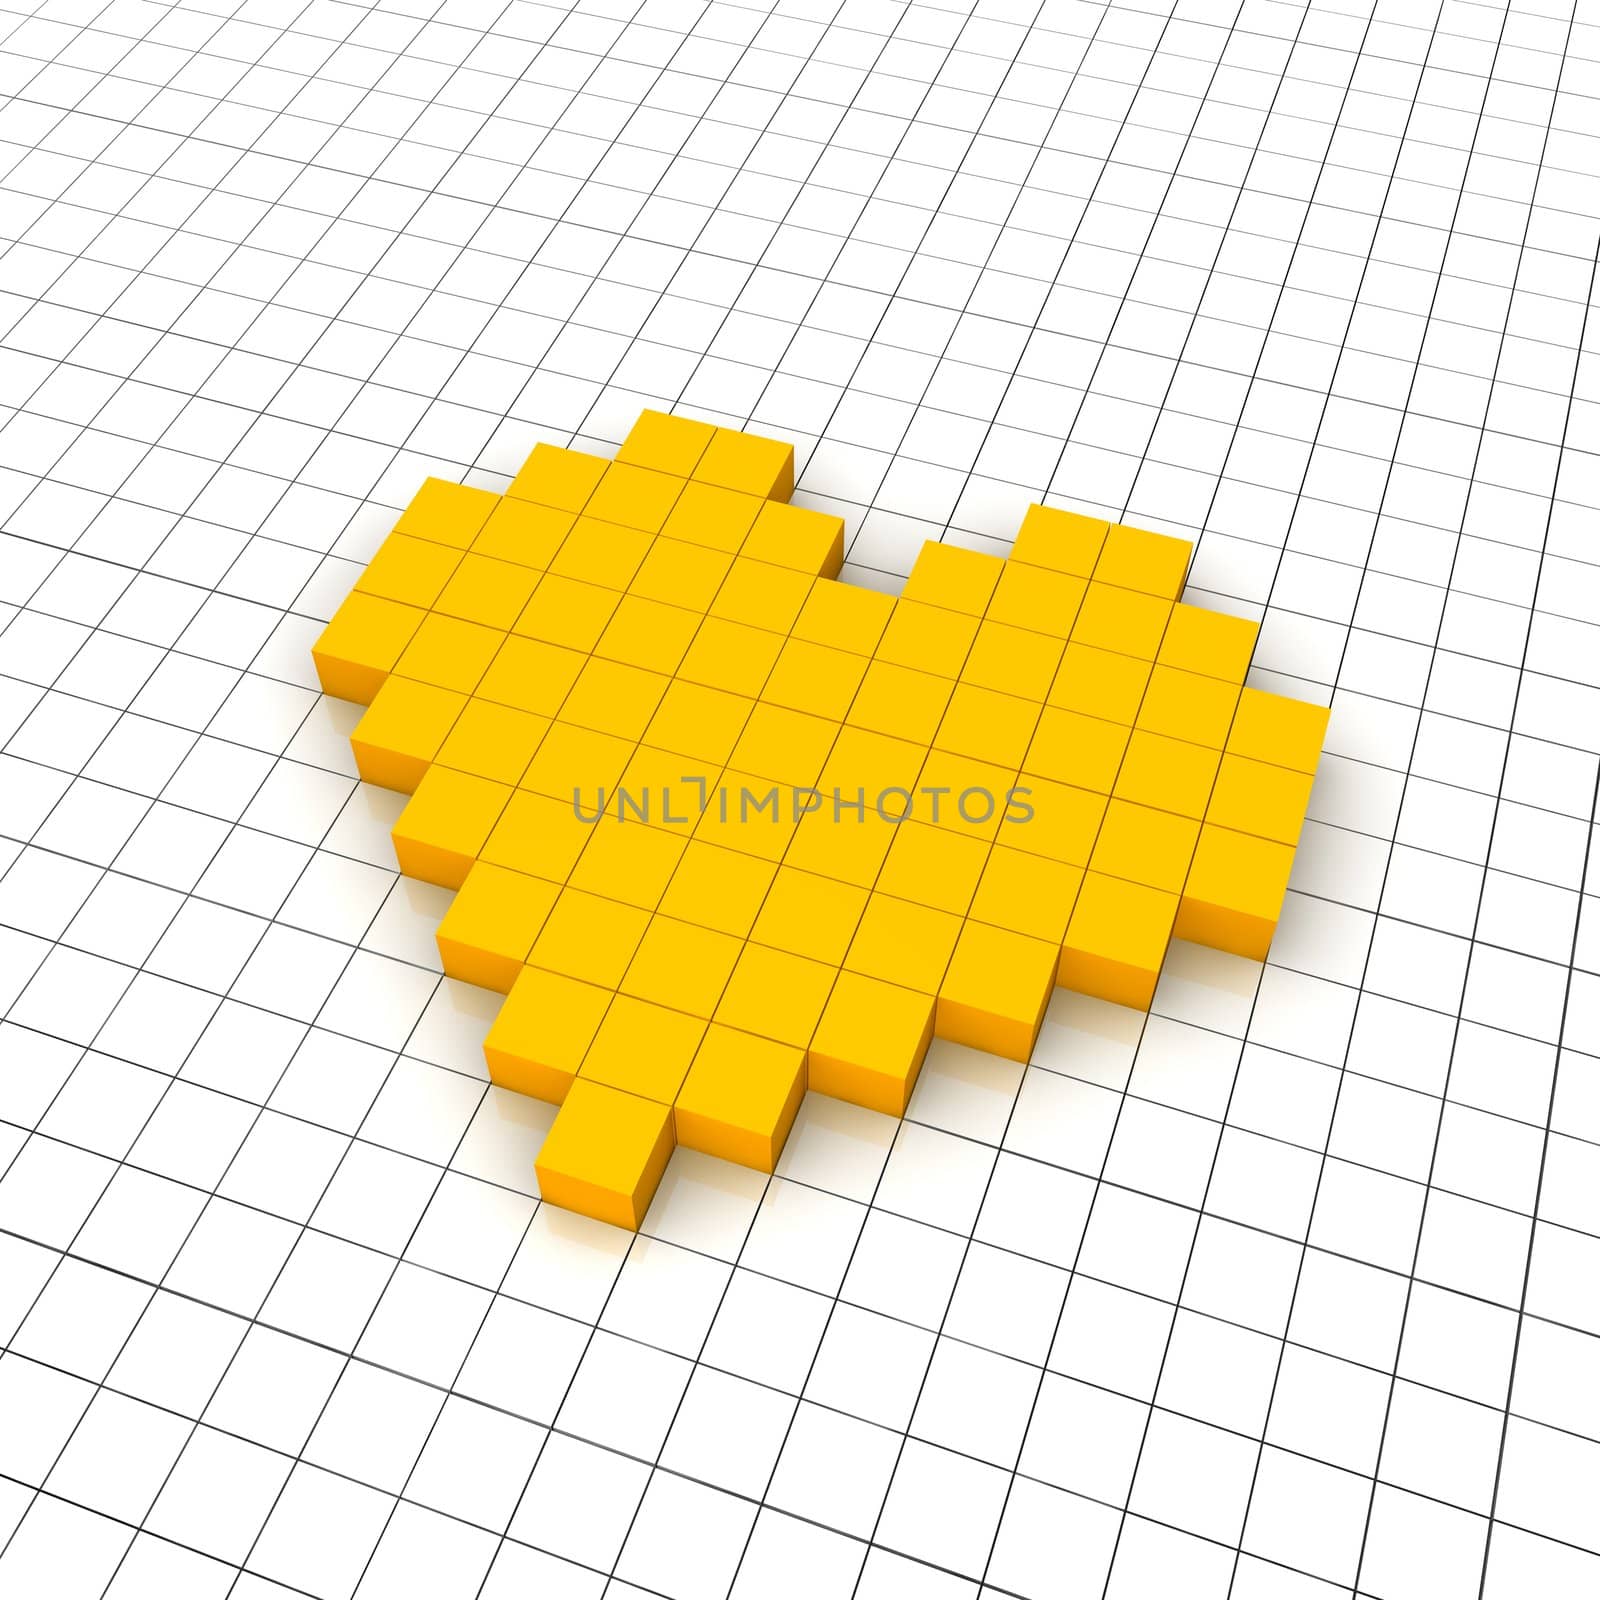 Heart 3d icon in grid. Rendered illustration.